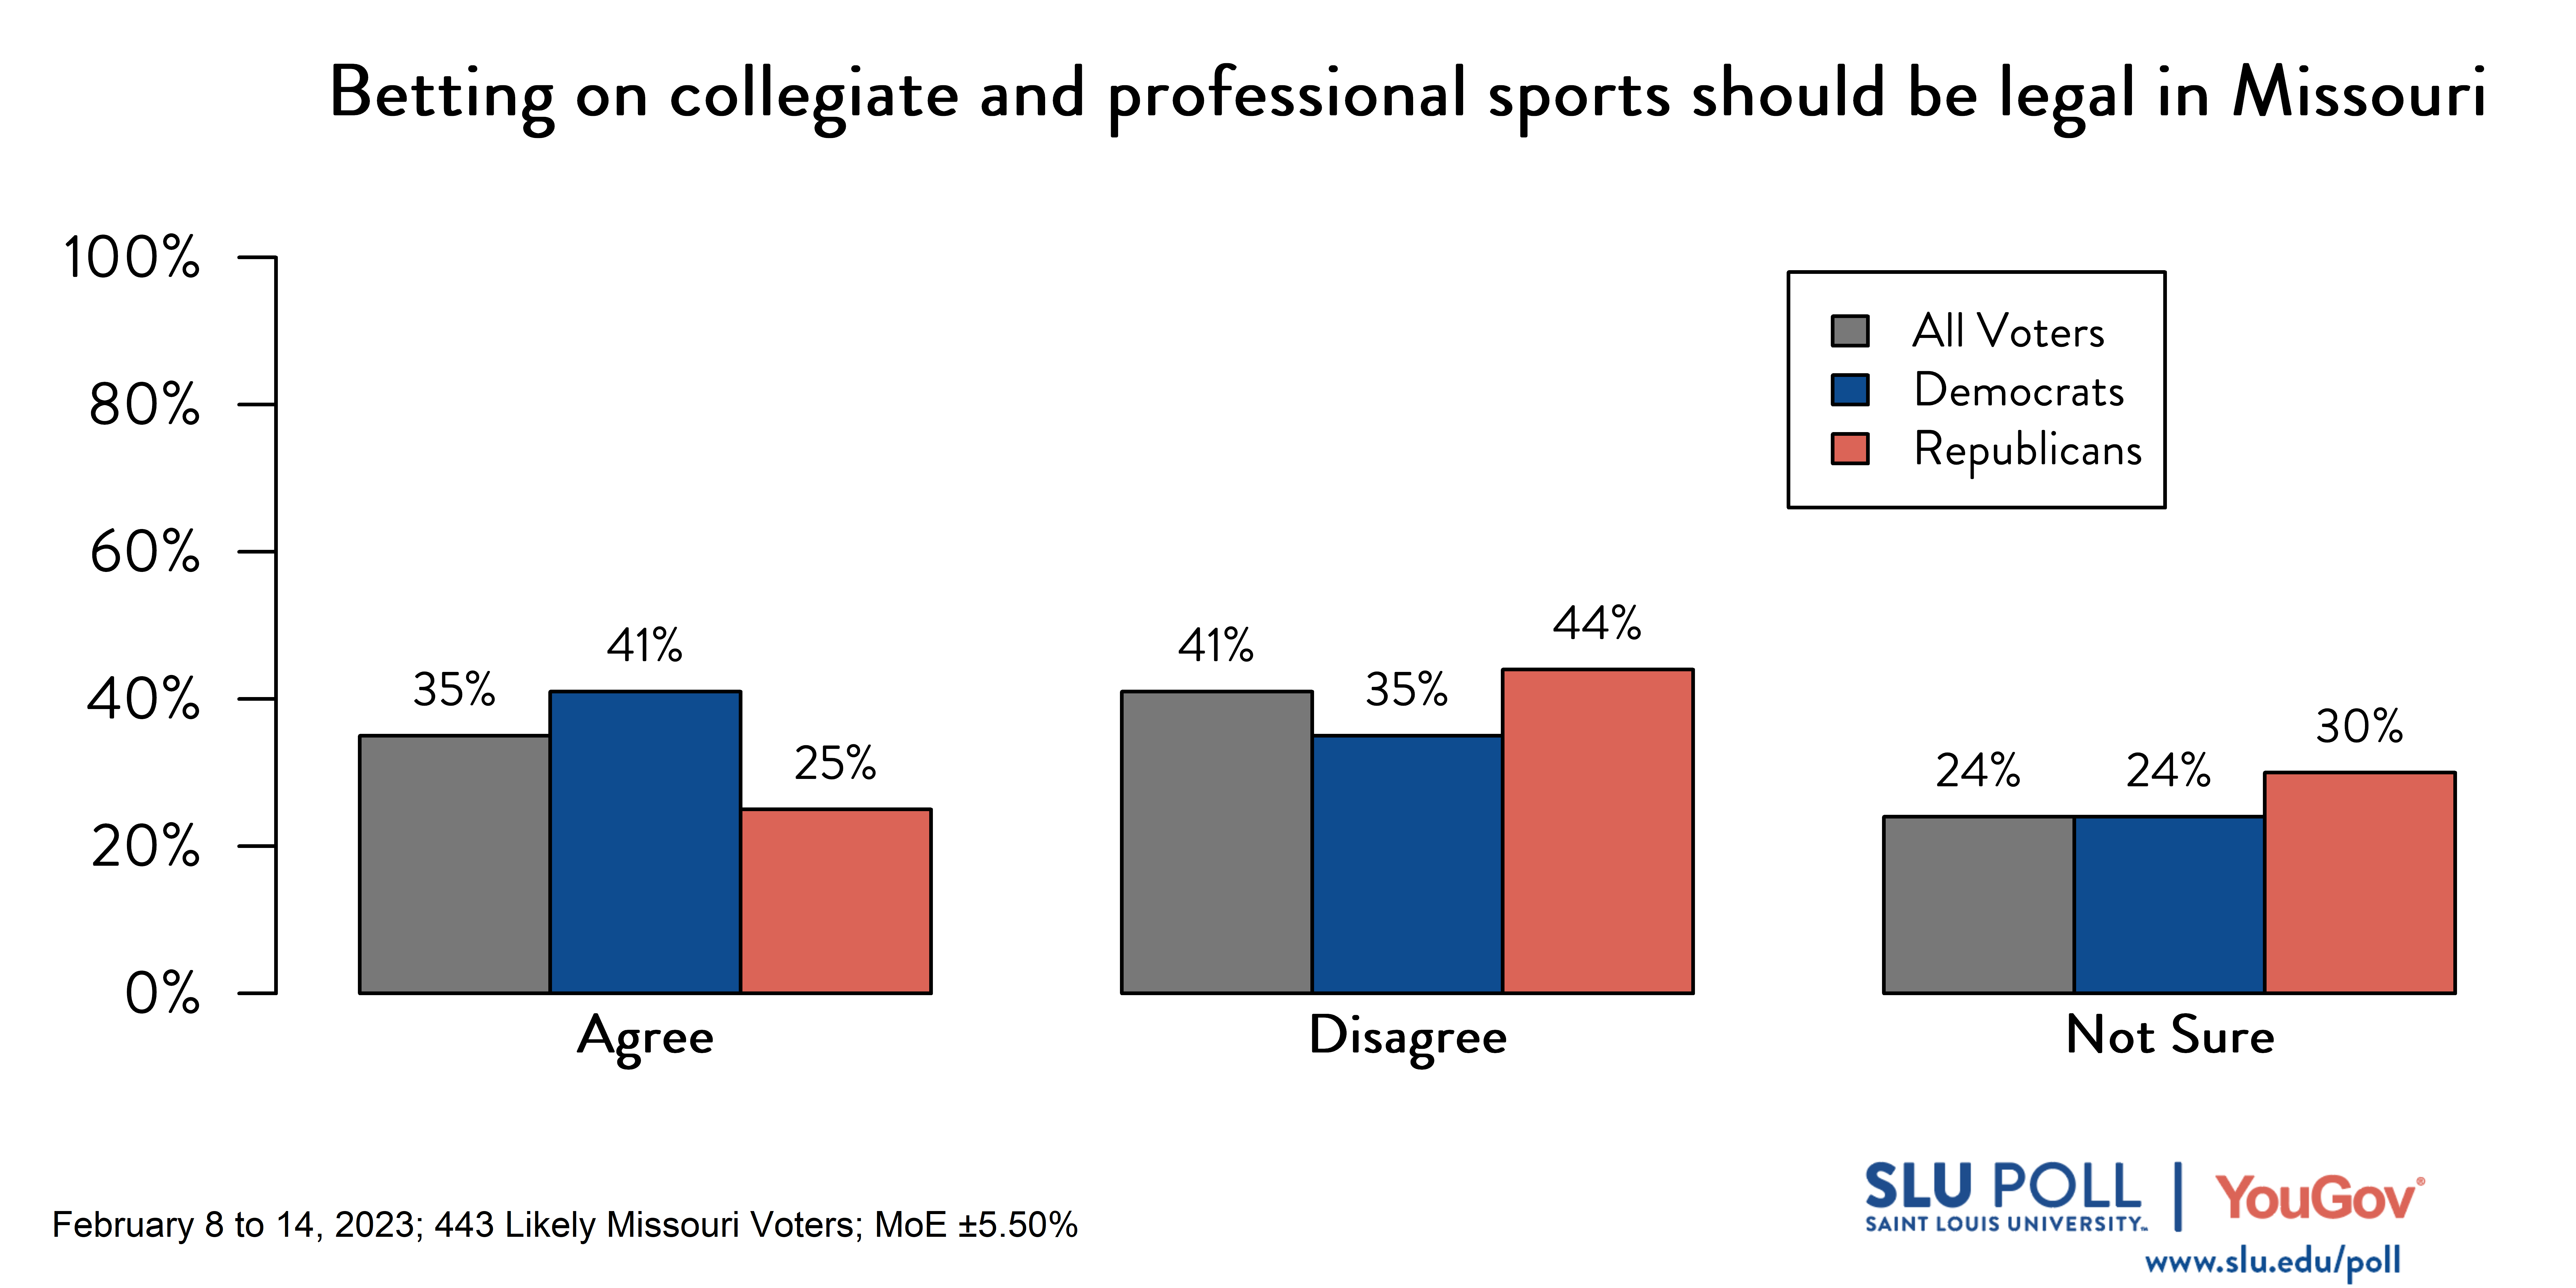 Likely voters' responses to 'Do you agree or disagree with the following statements: Betting on collegiate and professional sports should be legal in Missouri?': 35% Agree, 41% Disagree, and 24% Not sure. Democratic voters' responses: ' 41% Agree, 35% Disagree, and 24% Not sure. Republican voters' responses: 25% Agree, 44% Disagree, and 30% Not sure.